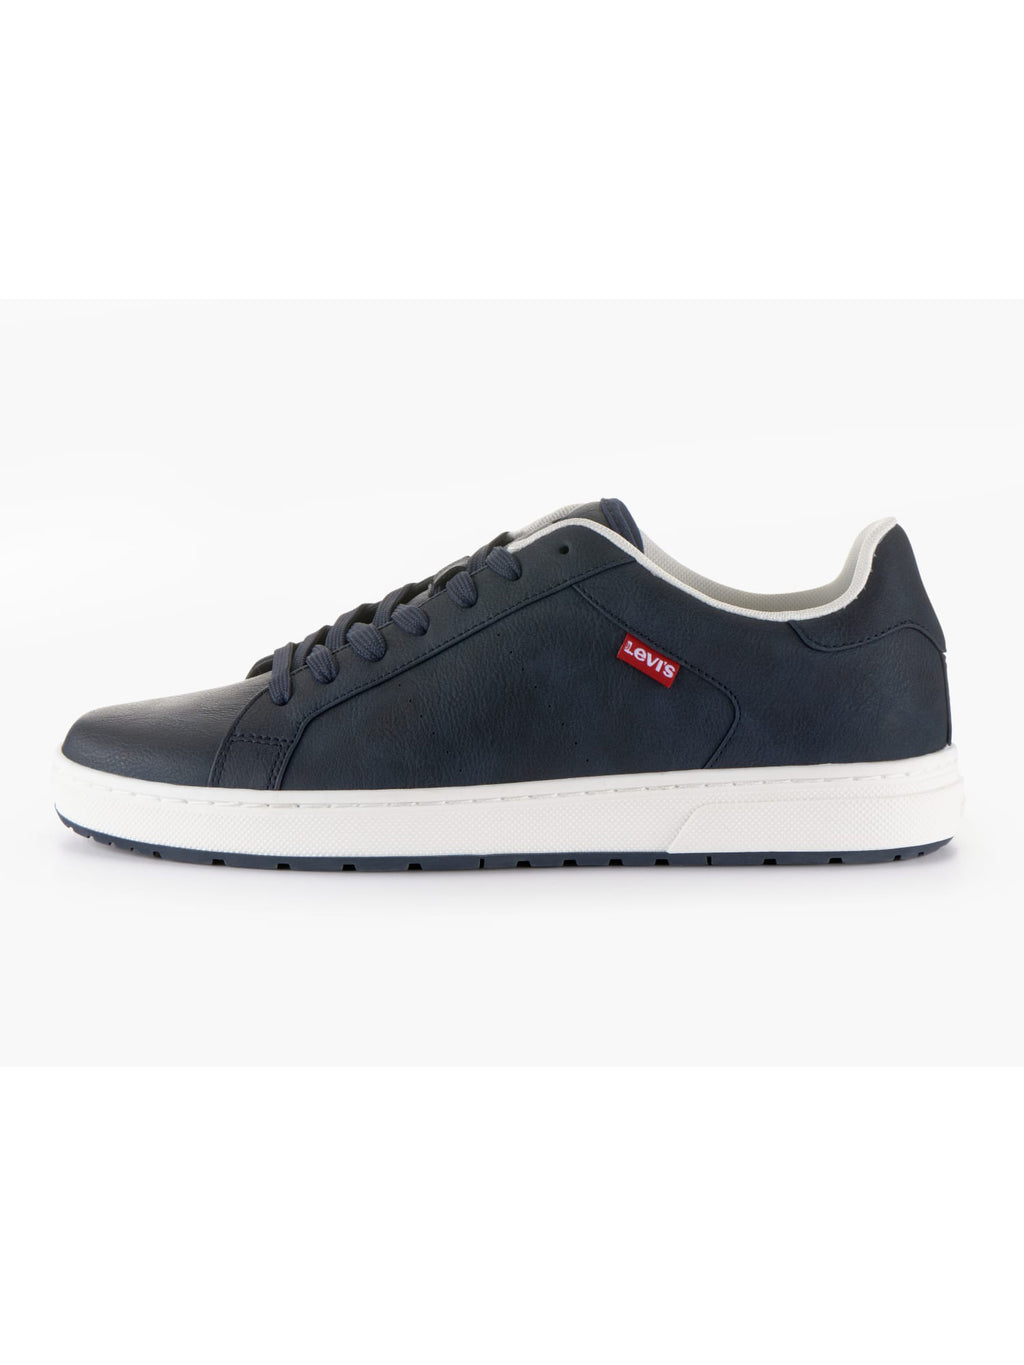 levis-piper-trainers-navy-234234-17